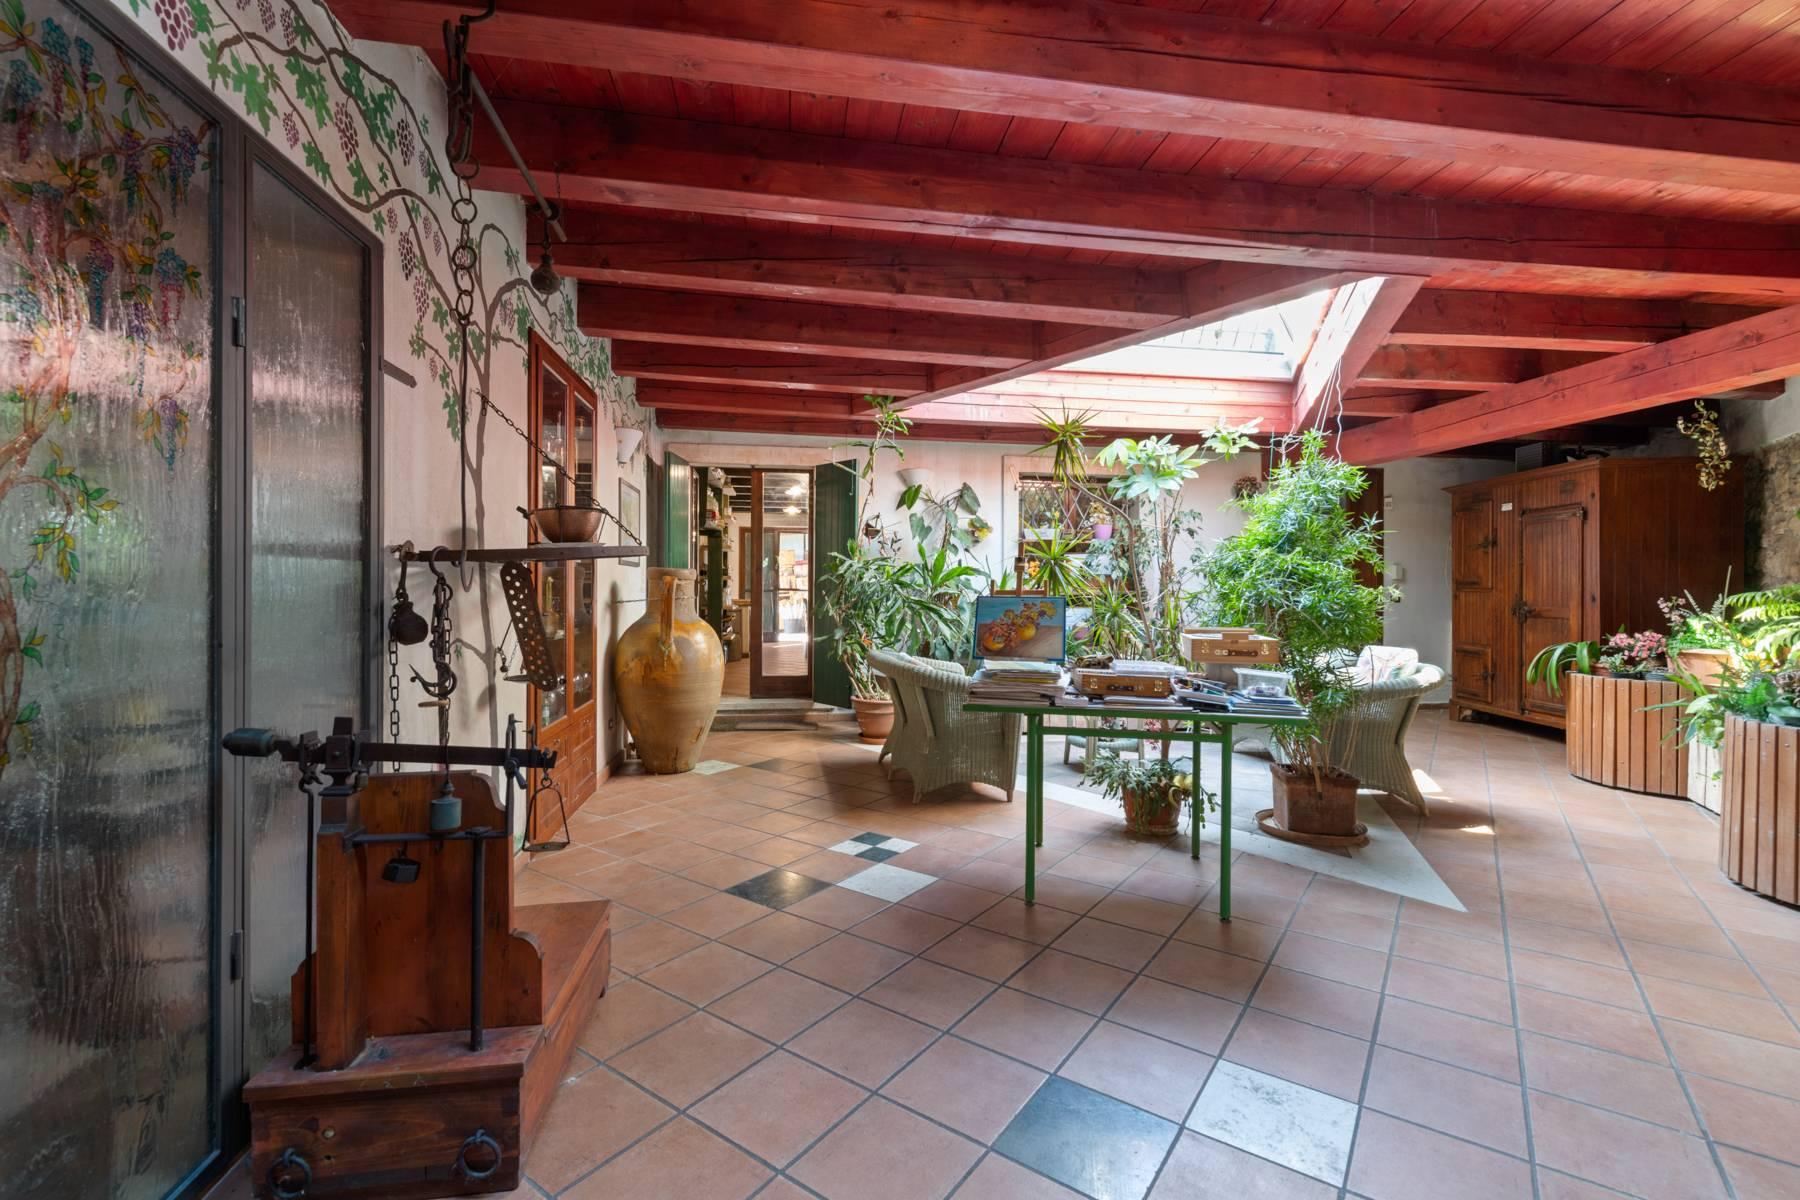 Historic country villa with swimming pool, tennis court and estate on the hills of Verona - 15